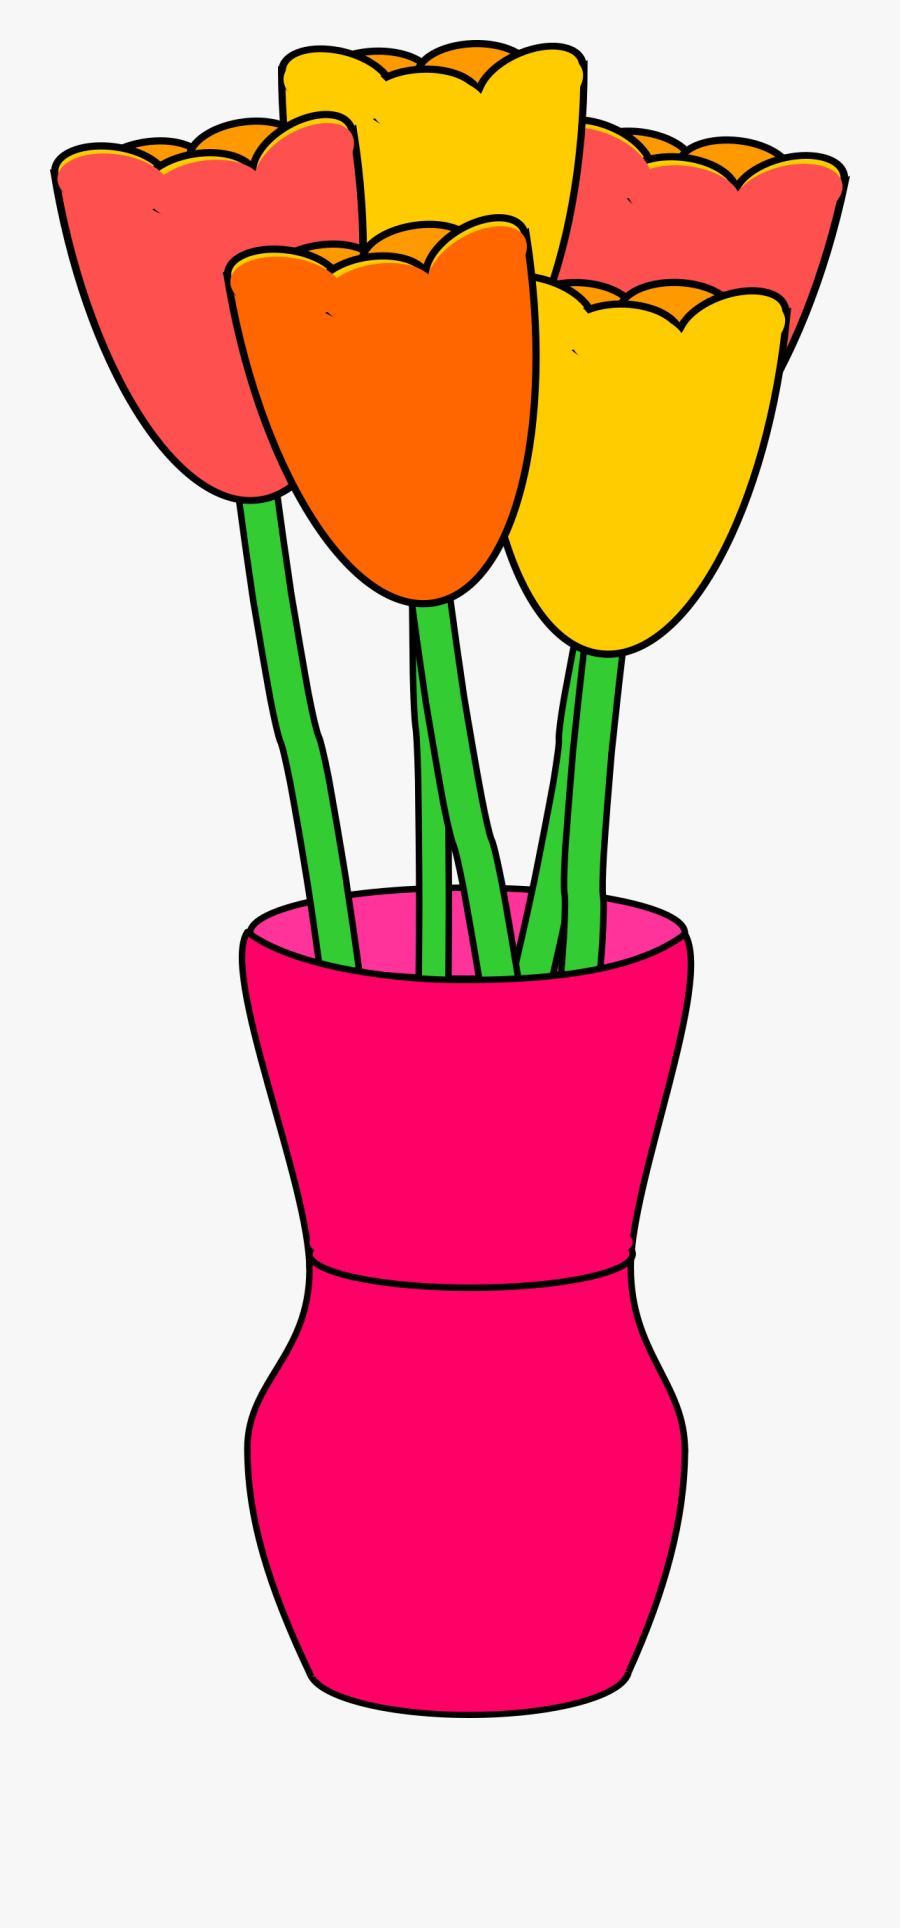 This Free Icons Png Design Of Pink Vase Of Multicolored - Tulip In Vase Clipart, Transparent Clipart